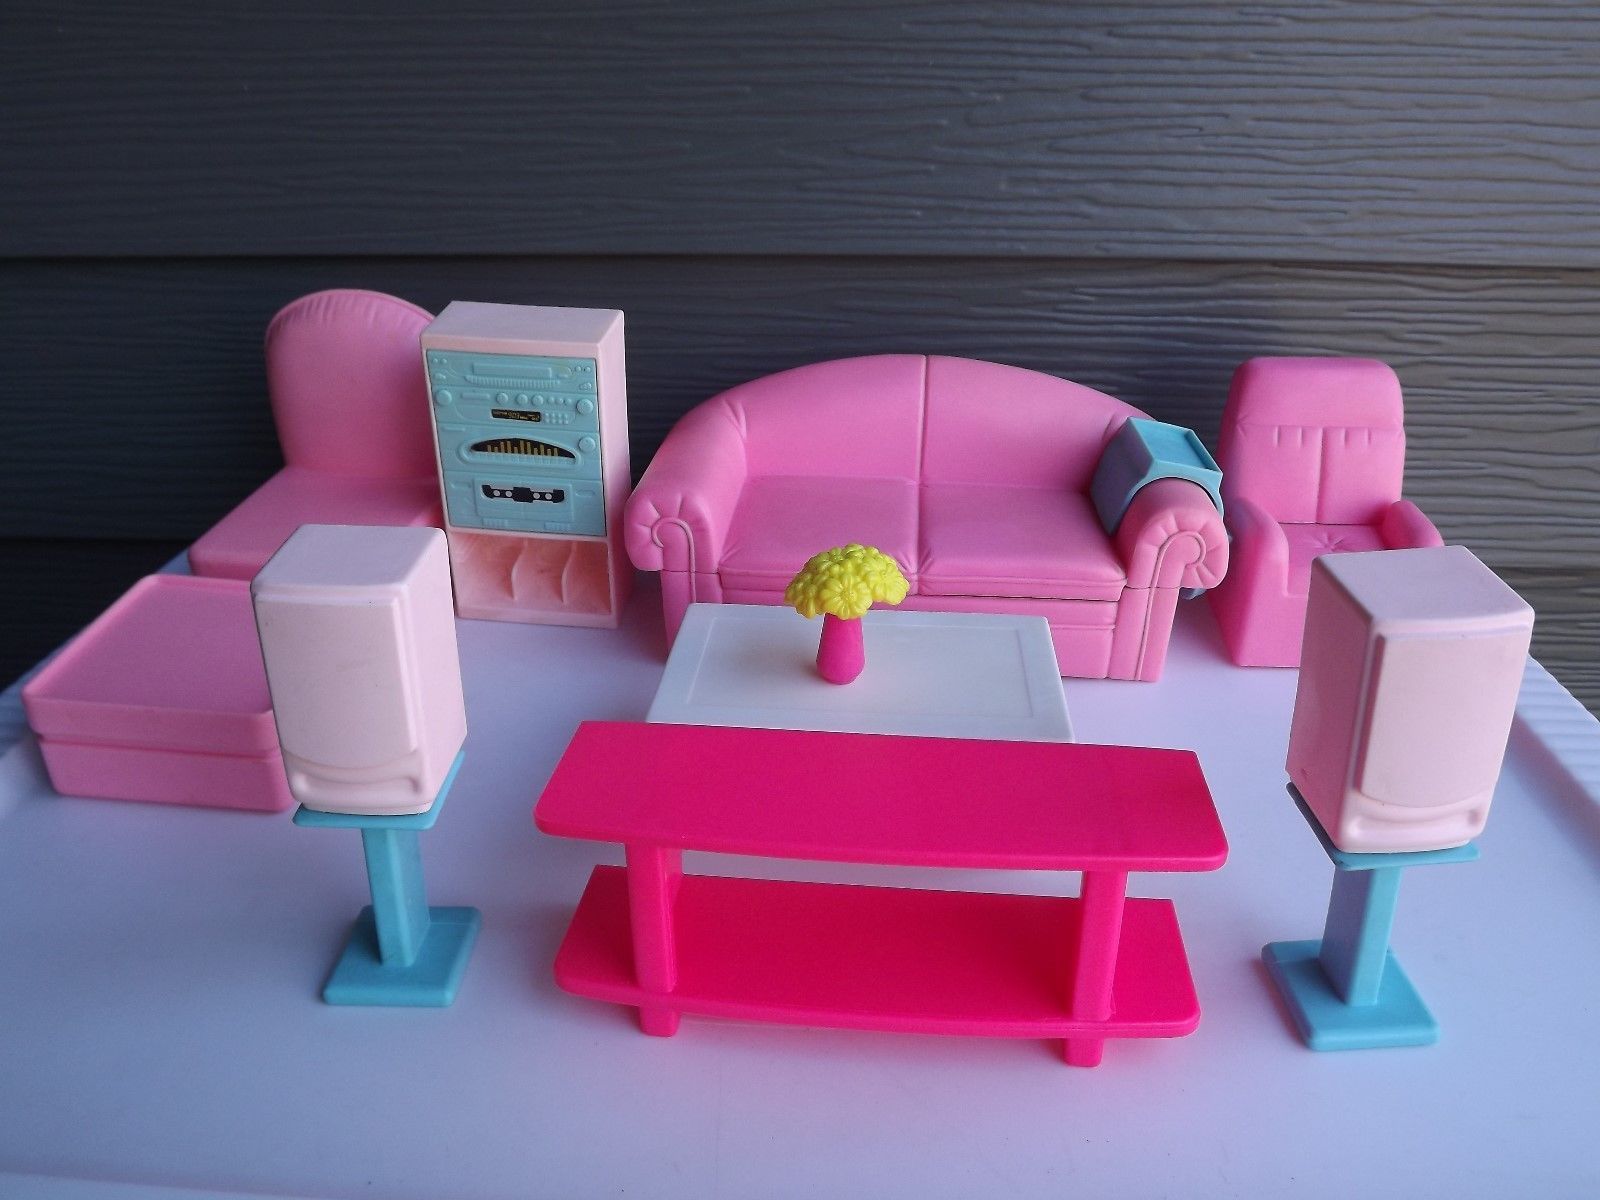 Barbie LIVING ROOM Furniture Set With Pet Cat Dolls Teddy Bears Barbie Structures Furniture 1973 Now